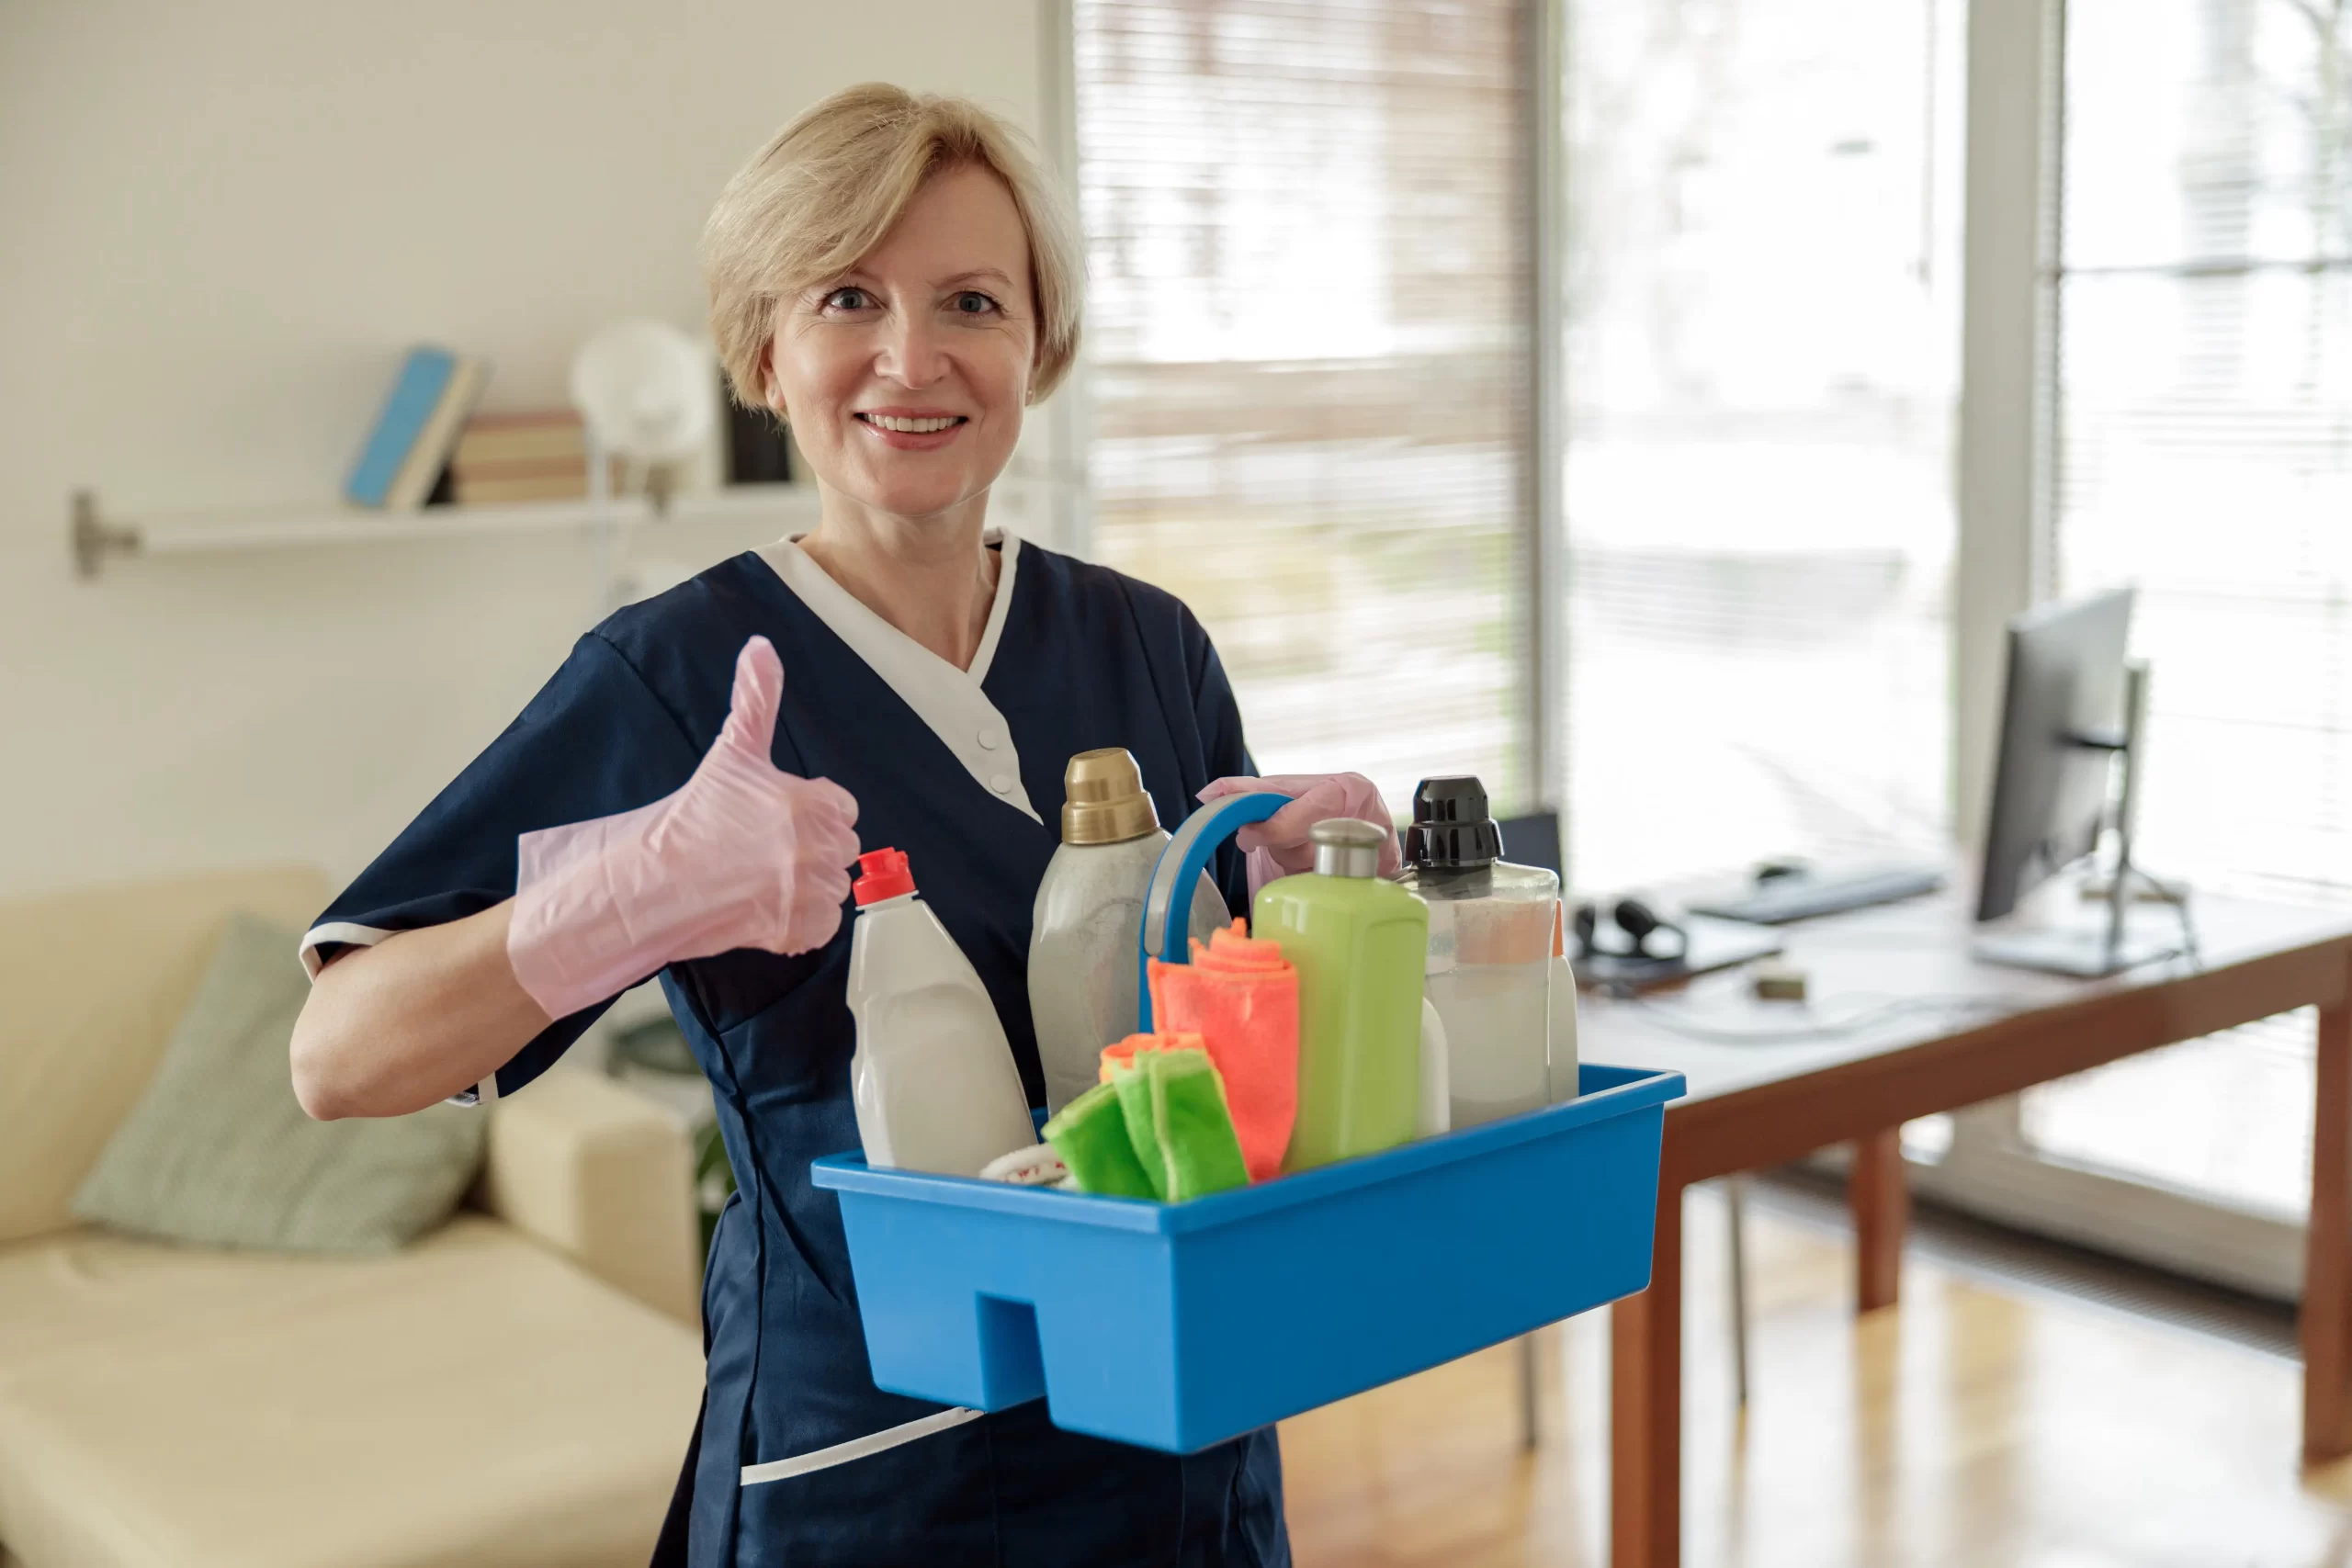 A cleaning lady giving a thumbs up while holding a cleaning tools.